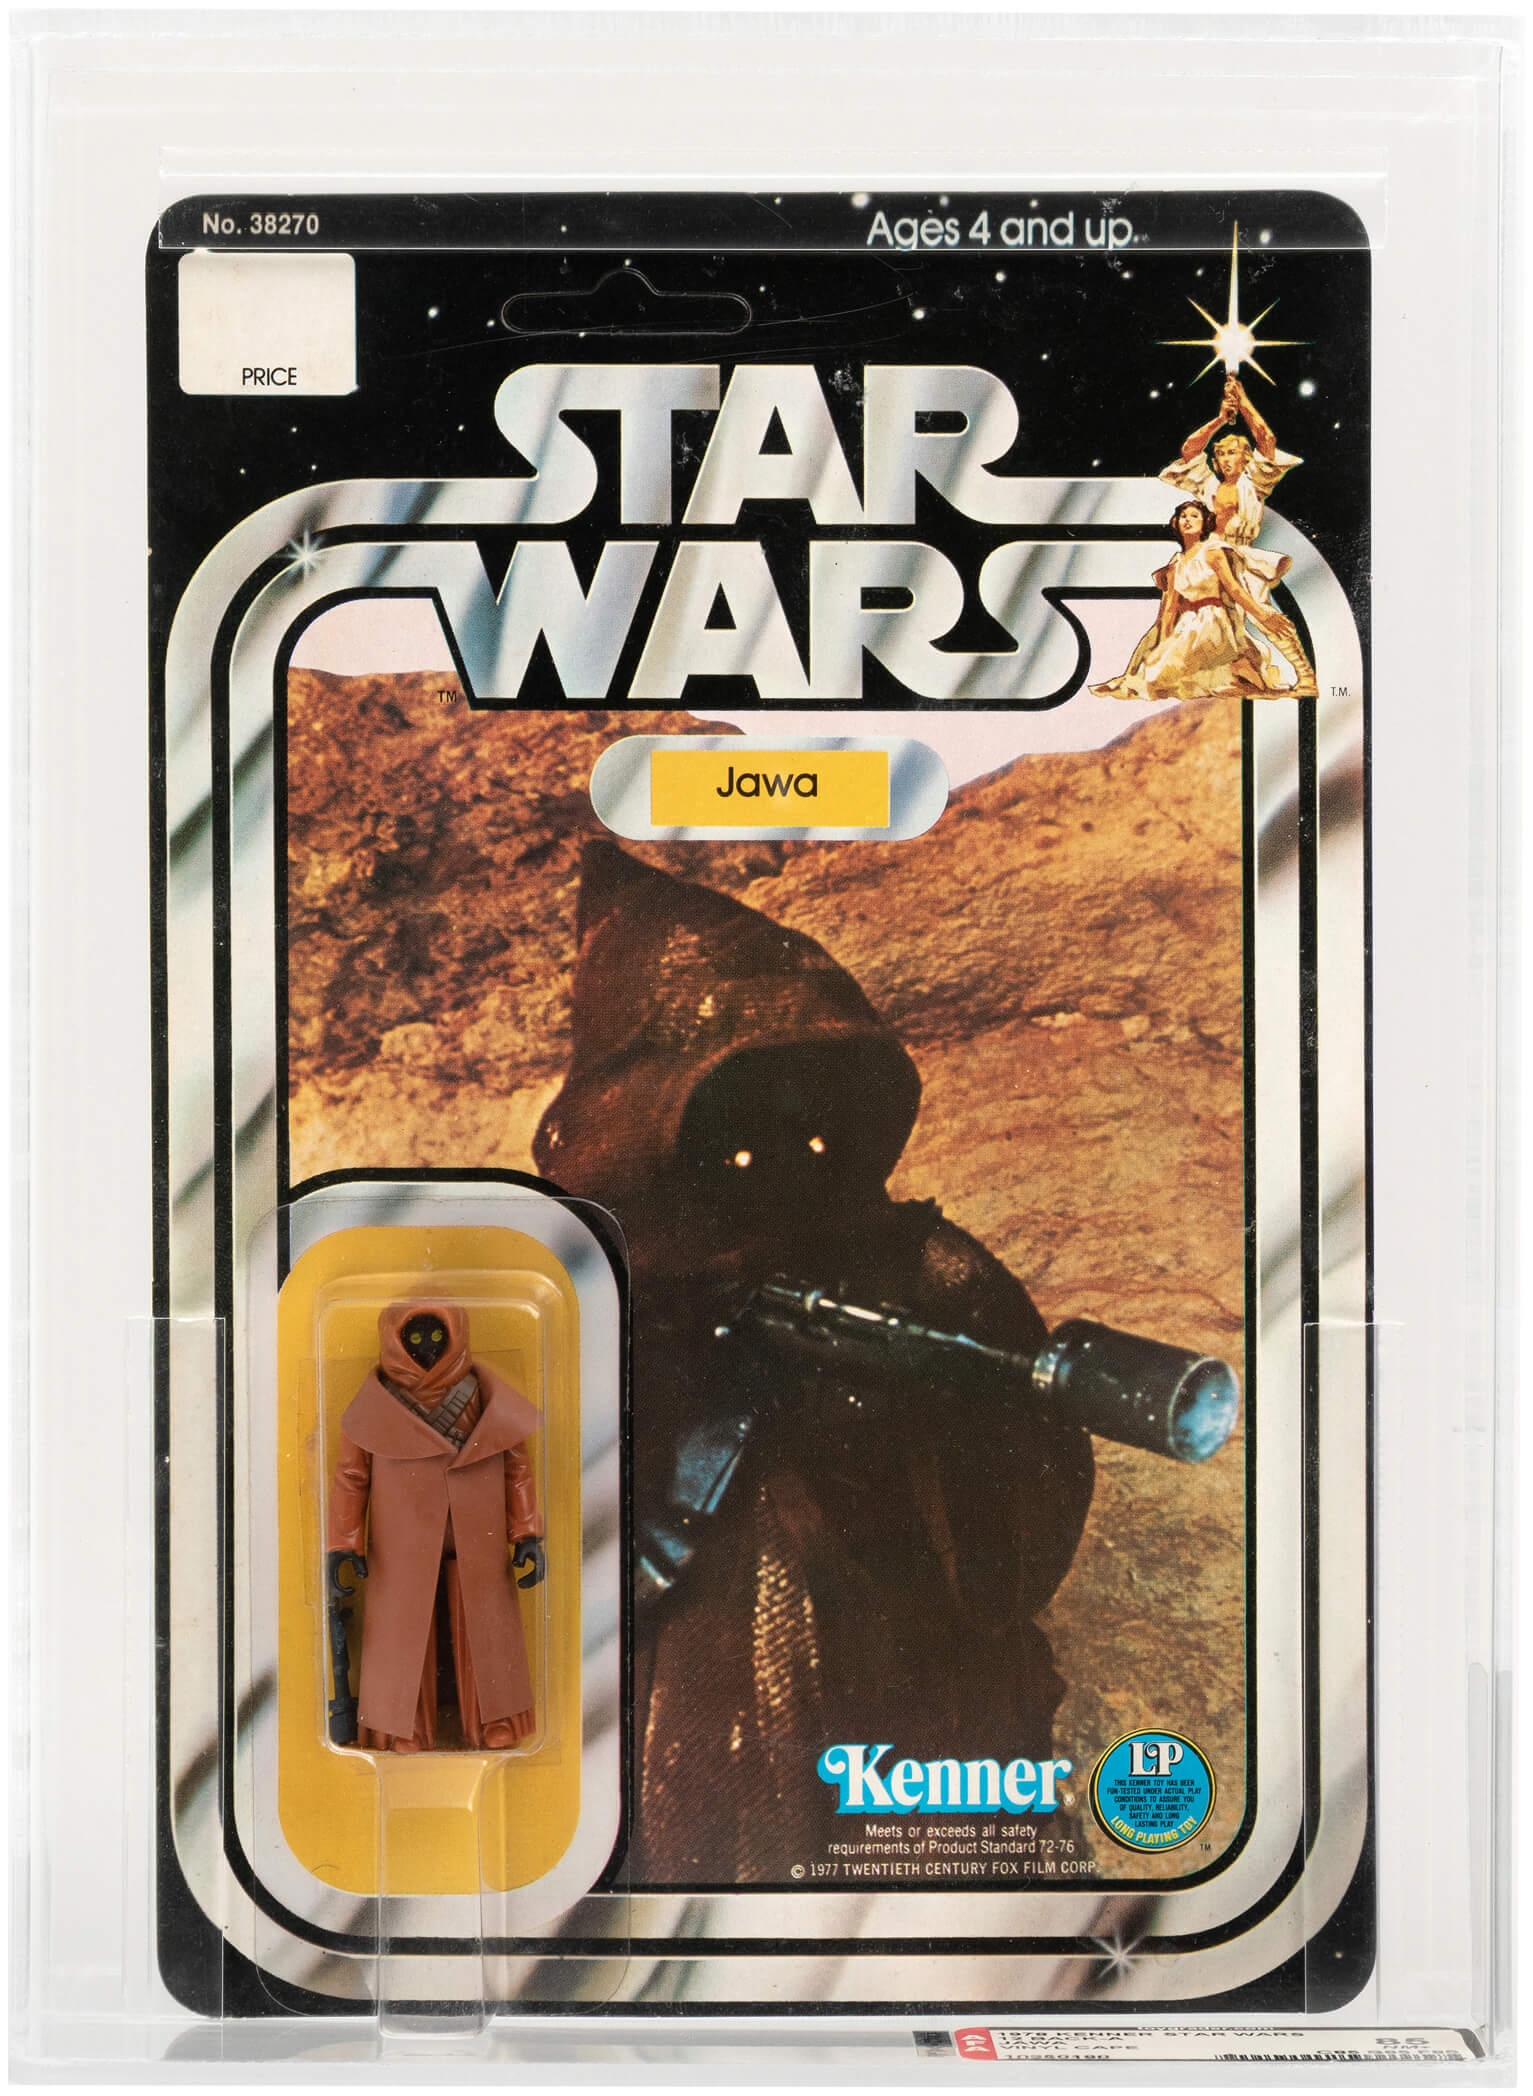 Kenner 2.25in action figure of Jawa (vinyl-cape version) from the 1978 Star Wars toy line, AFA 85 NM+, 12 Back-A blister card, unpunched, archival case. Est. $35,000-$50,000. Image courtesy of Hake’s Auctions